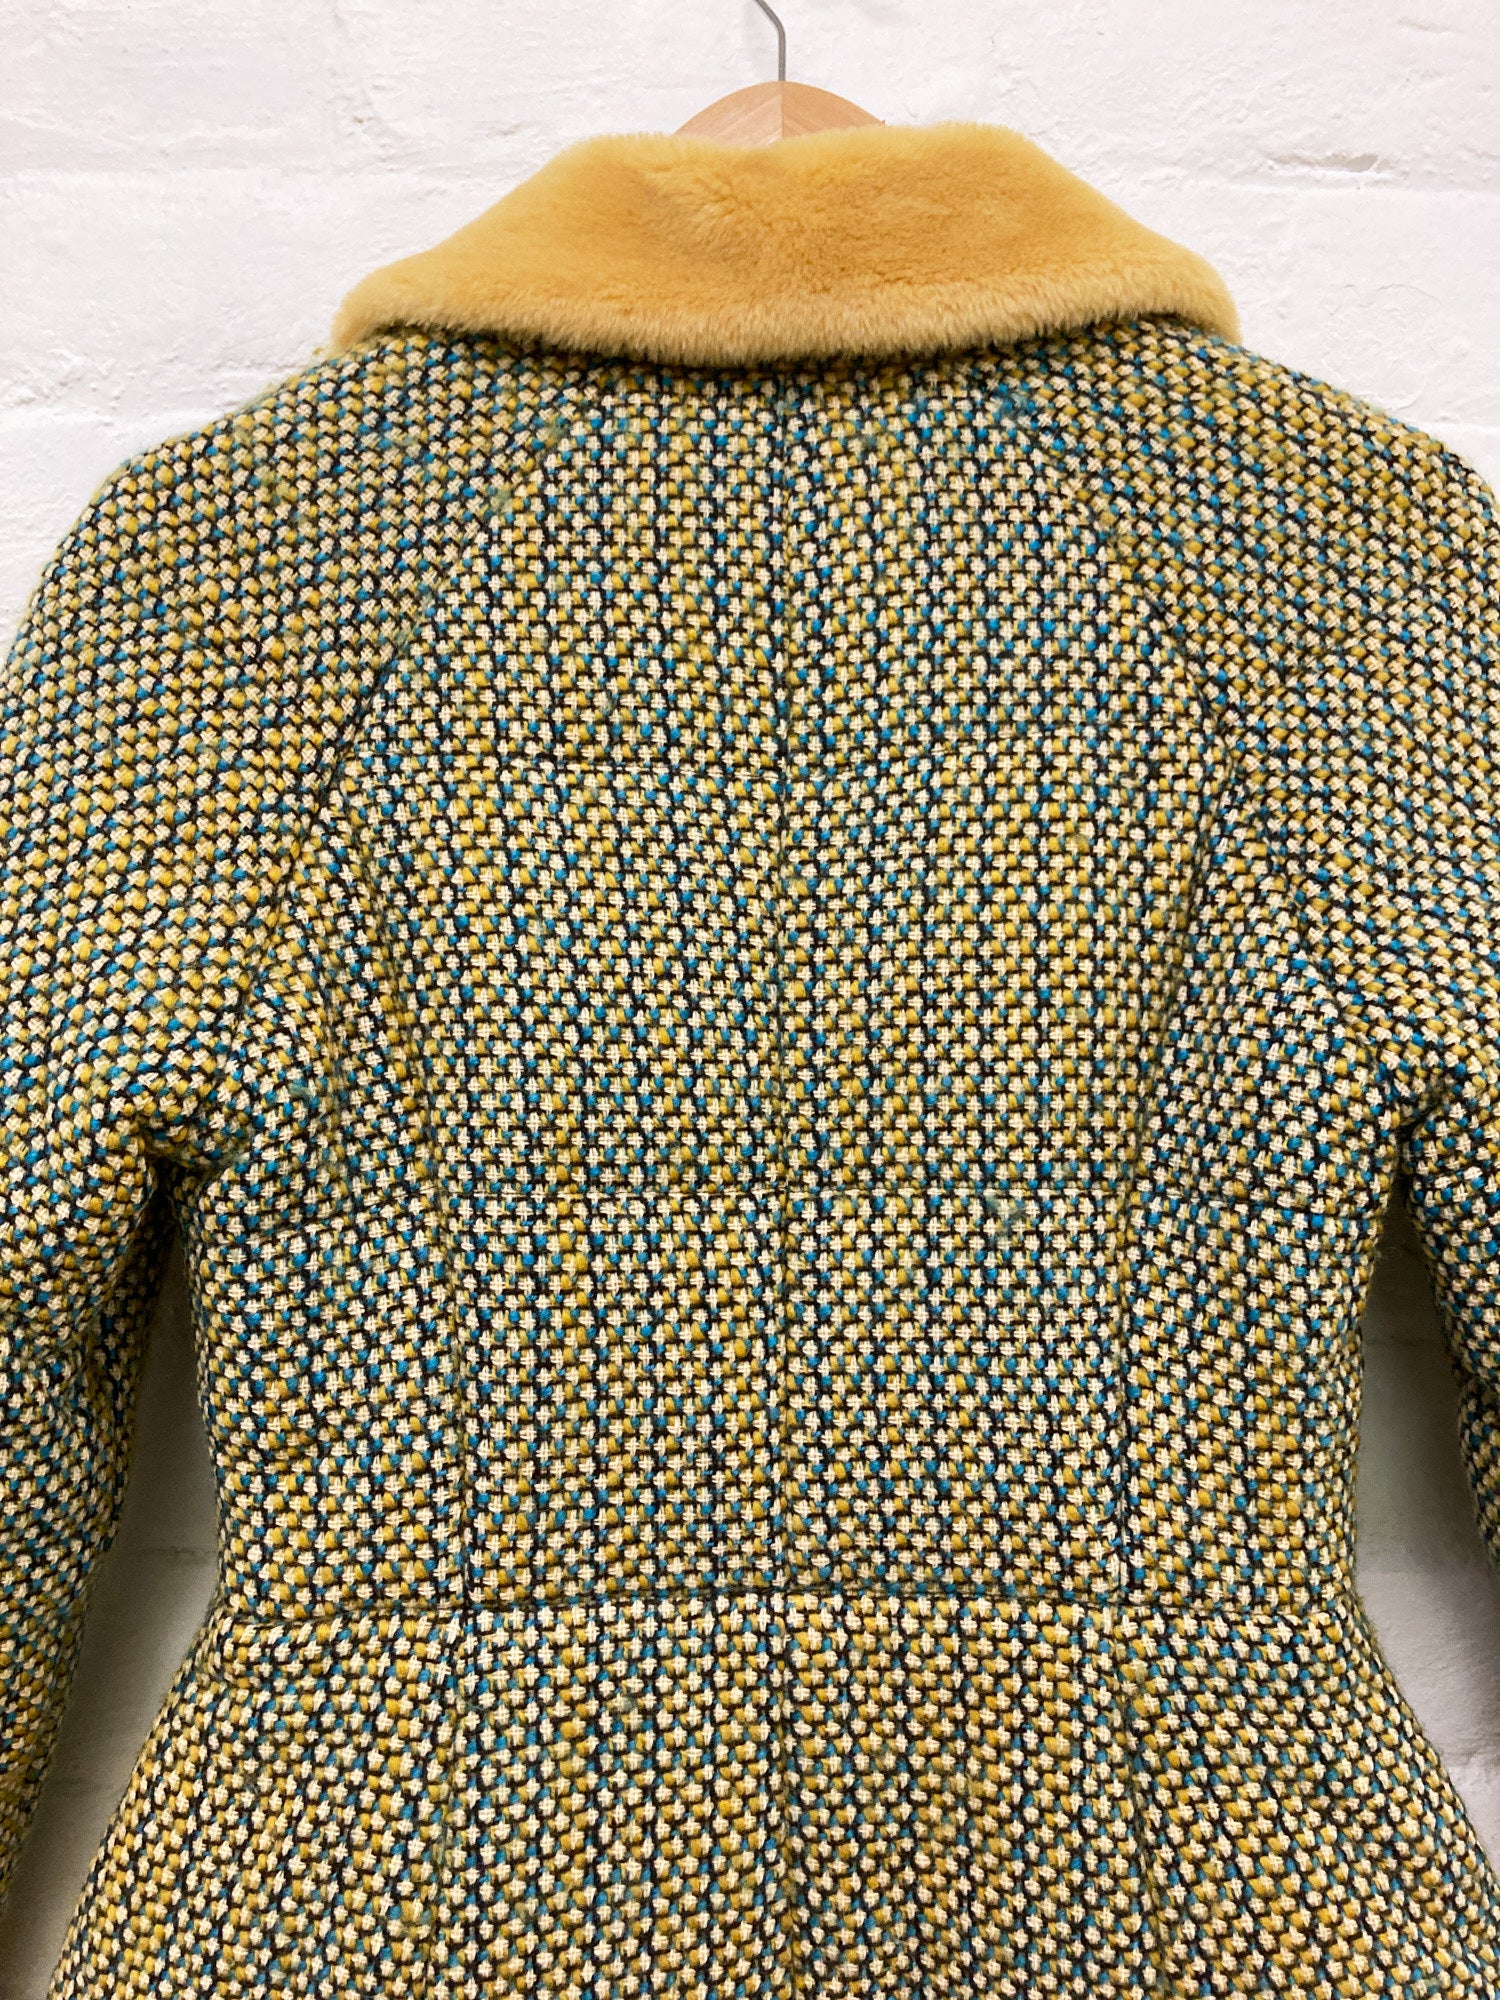 Kenzo Club padded green tweed zip jacket with faux fur collar - size 38